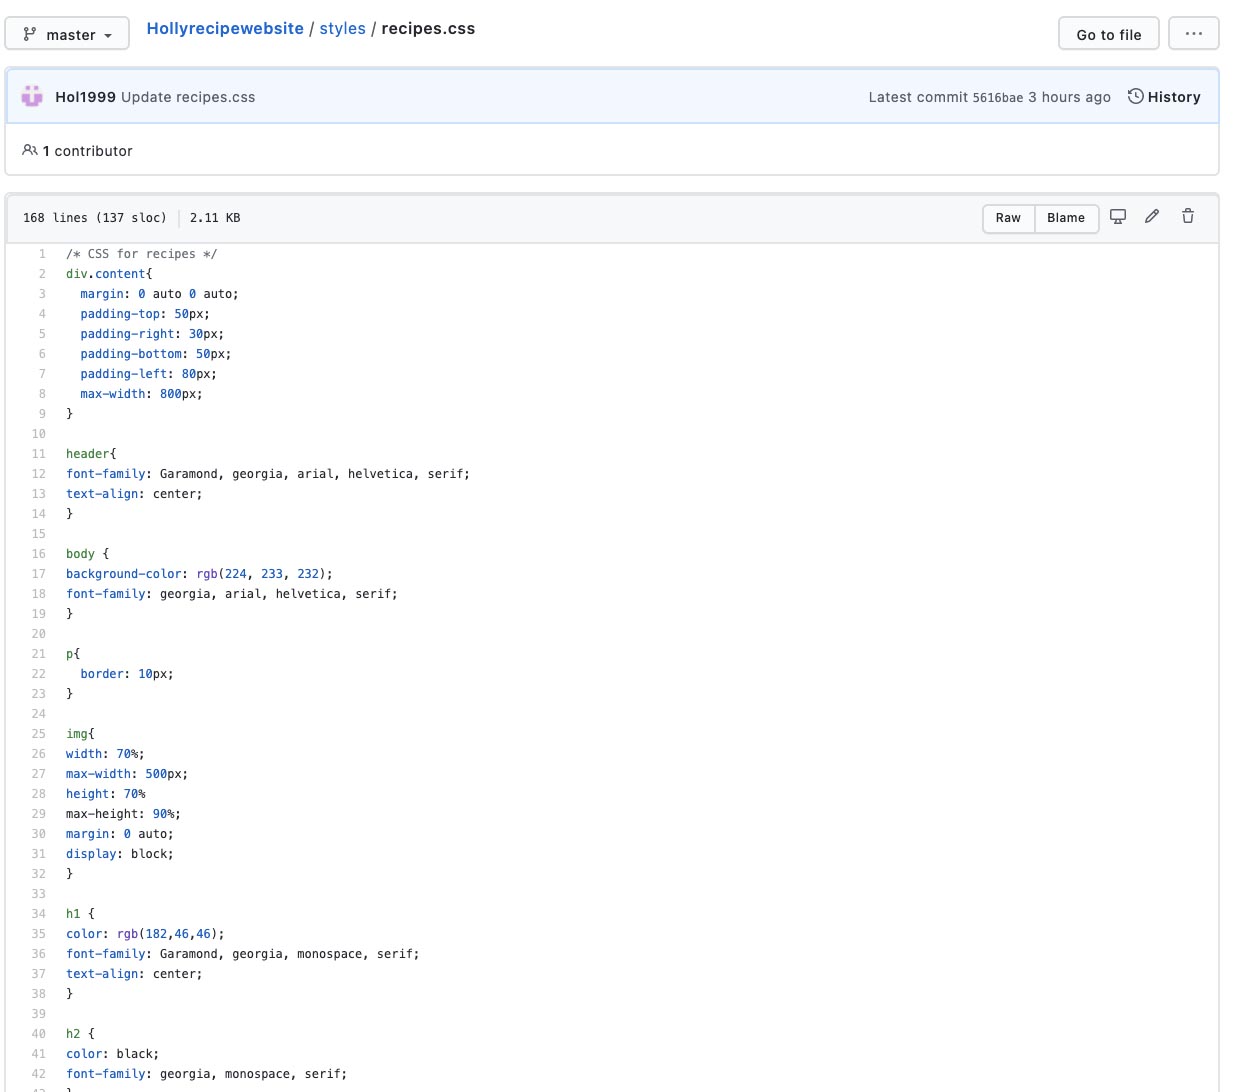 A screenshot of the allrecipes page on tornbetween's GitHub recipe.CSS